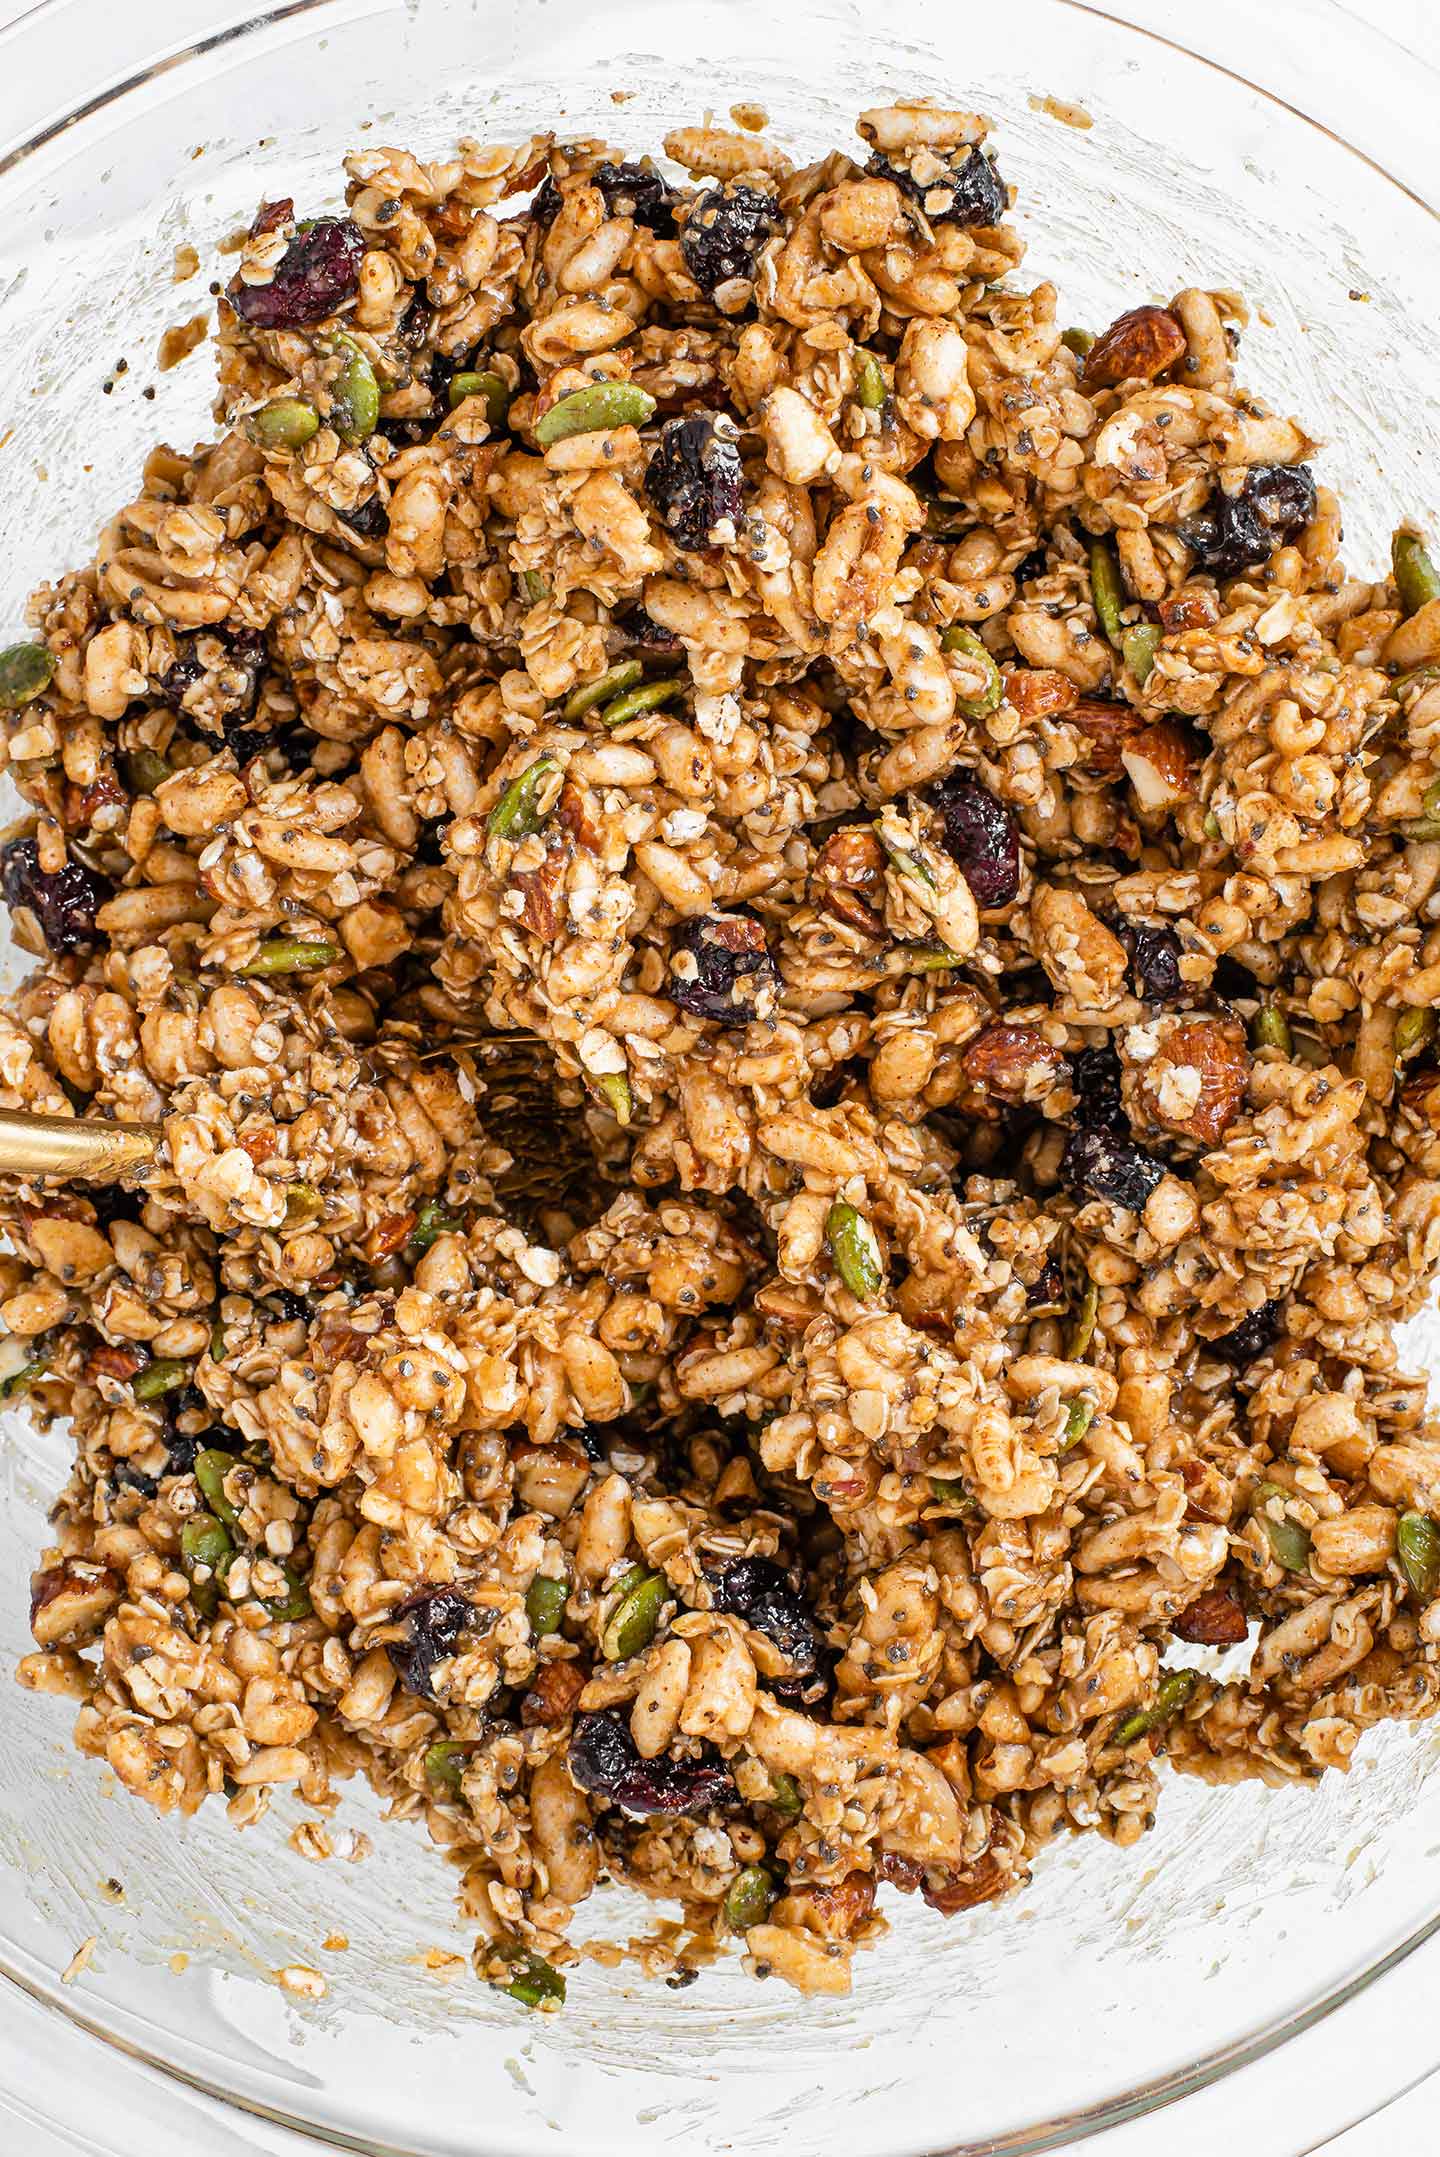 Top down view of the puffed granola bar mixture combined in a large glass bowl. The mixture is sticky and fully coated.